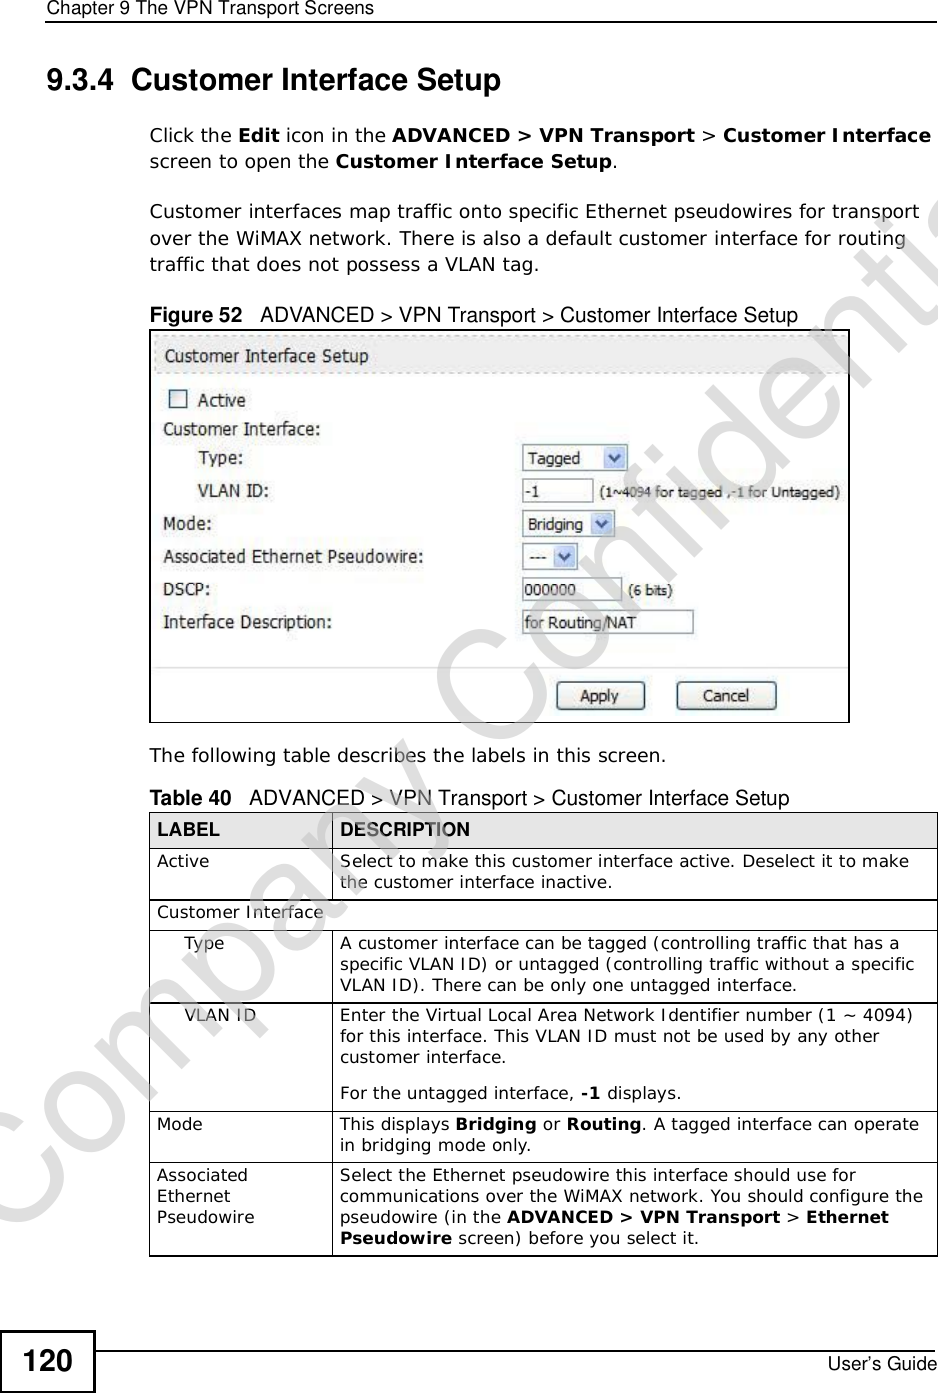 Chapter 9The VPN Transport ScreensUser’s Guide1209.3.4  Customer Interface SetupClick the Edit icon in the ADVANCED &gt;VPN Transport &gt; Customer Interfacescreen to open the Customer Interface Setup.Customer interfaces map traffic onto specific Ethernet pseudowires for transport over the WiMAX network. There is also a default customer interface for routing traffic that does not possess a VLAN tag.Figure 52   ADVANCED &gt; VPN Transport &gt; Customer Interface Setup     The following table describes the labels in this screen.    Table 40   ADVANCED &gt; VPN Transport &gt; Customer Interface SetupLABEL DESCRIPTIONActiveSelect to make this customer interface active. Deselect it to make the customer interface inactive.Customer InterfaceTypeA customer interface can be tagged (controlling traffic that has a specific VLAN ID) or untagged (controlling traffic without a specific VLAN ID). There can be only one untagged interface.VLAN IDEnter the Virtual Local Area Network Identifier number (1 ~ 4094) for this interface. This VLAN ID must not be used by any other customer interface. For the untagged interface, -1 displays.ModeThis displays Bridging or Routing. A tagged interface can operate in bridging mode only.AssociatedEthernet PseudowireSelect the Ethernet pseudowire this interface should use for communications over the WiMAX network. You should configure the pseudowire (in the ADVANCED &gt;VPN Transport &gt;Ethernet Pseudowire screen) before you select it.Company Confidential